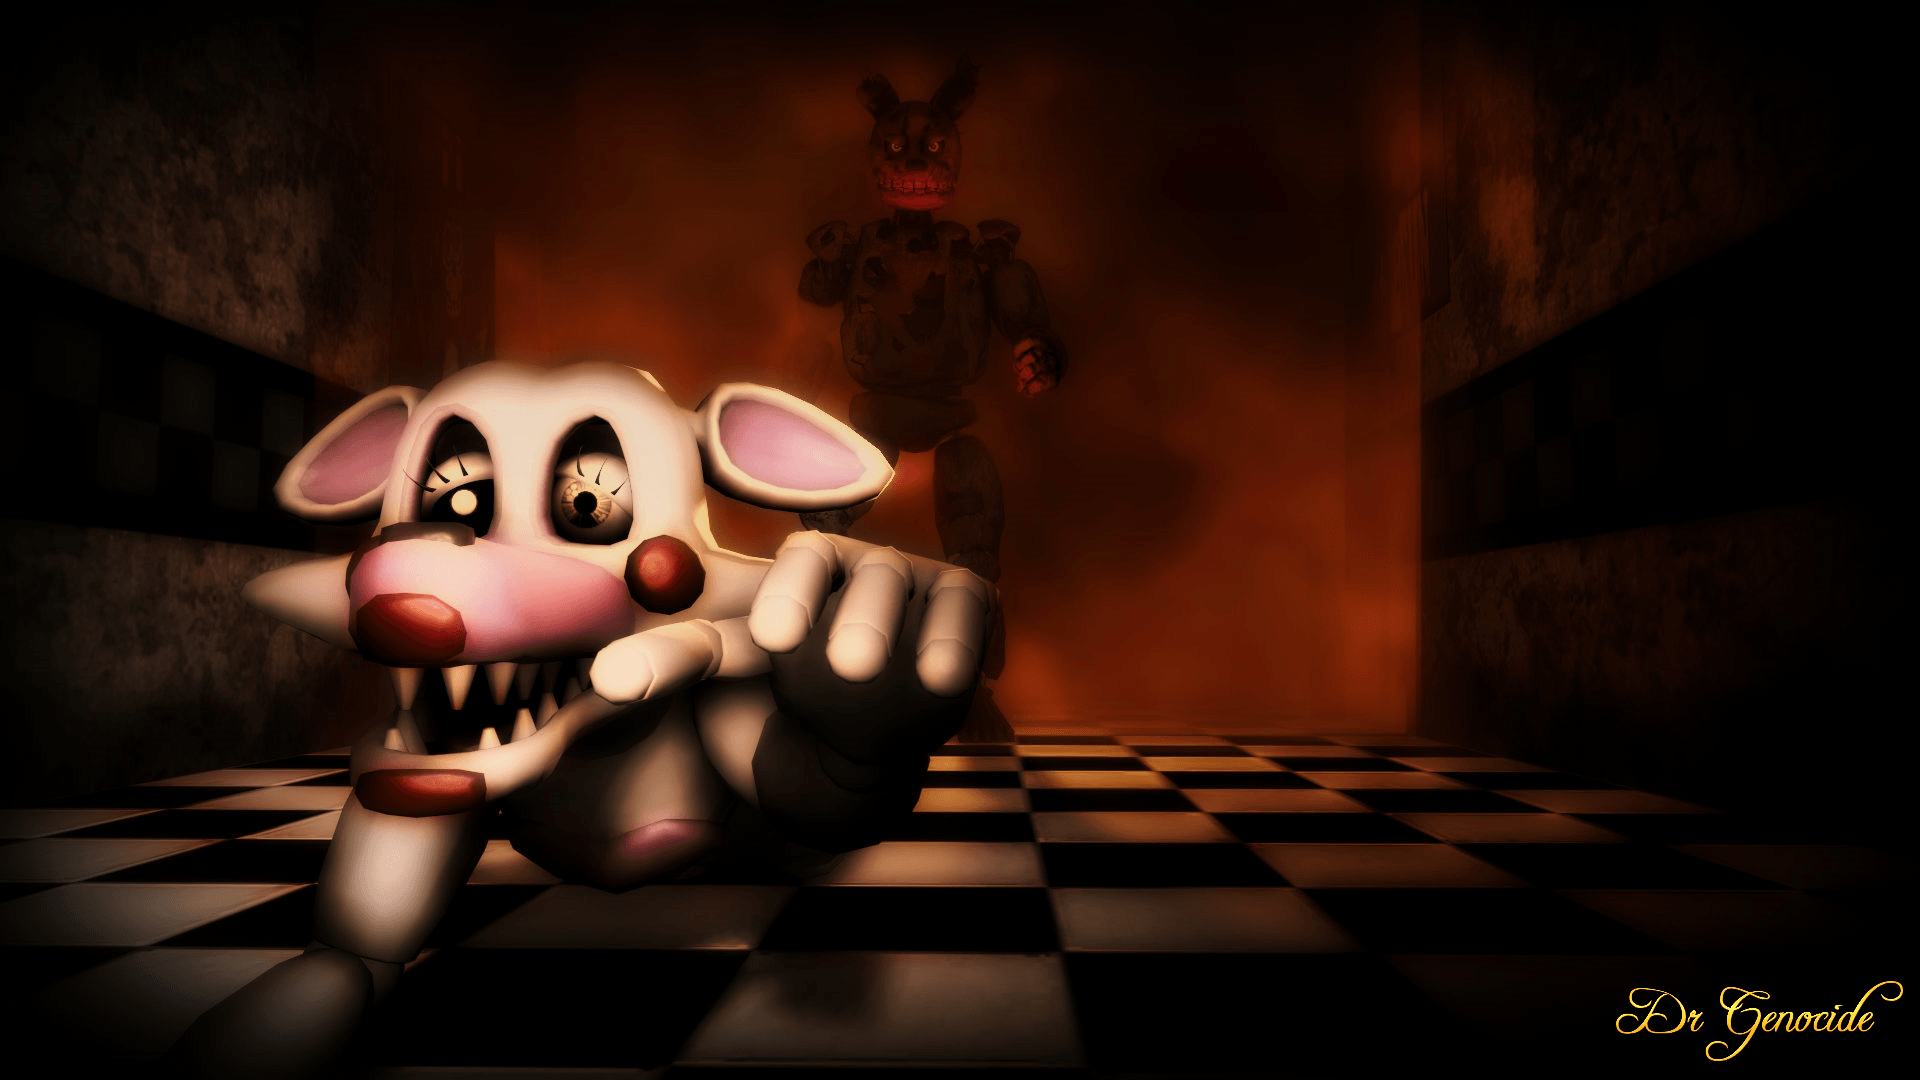 Foxy X Mangle Wallpapers Wallpaper Cave